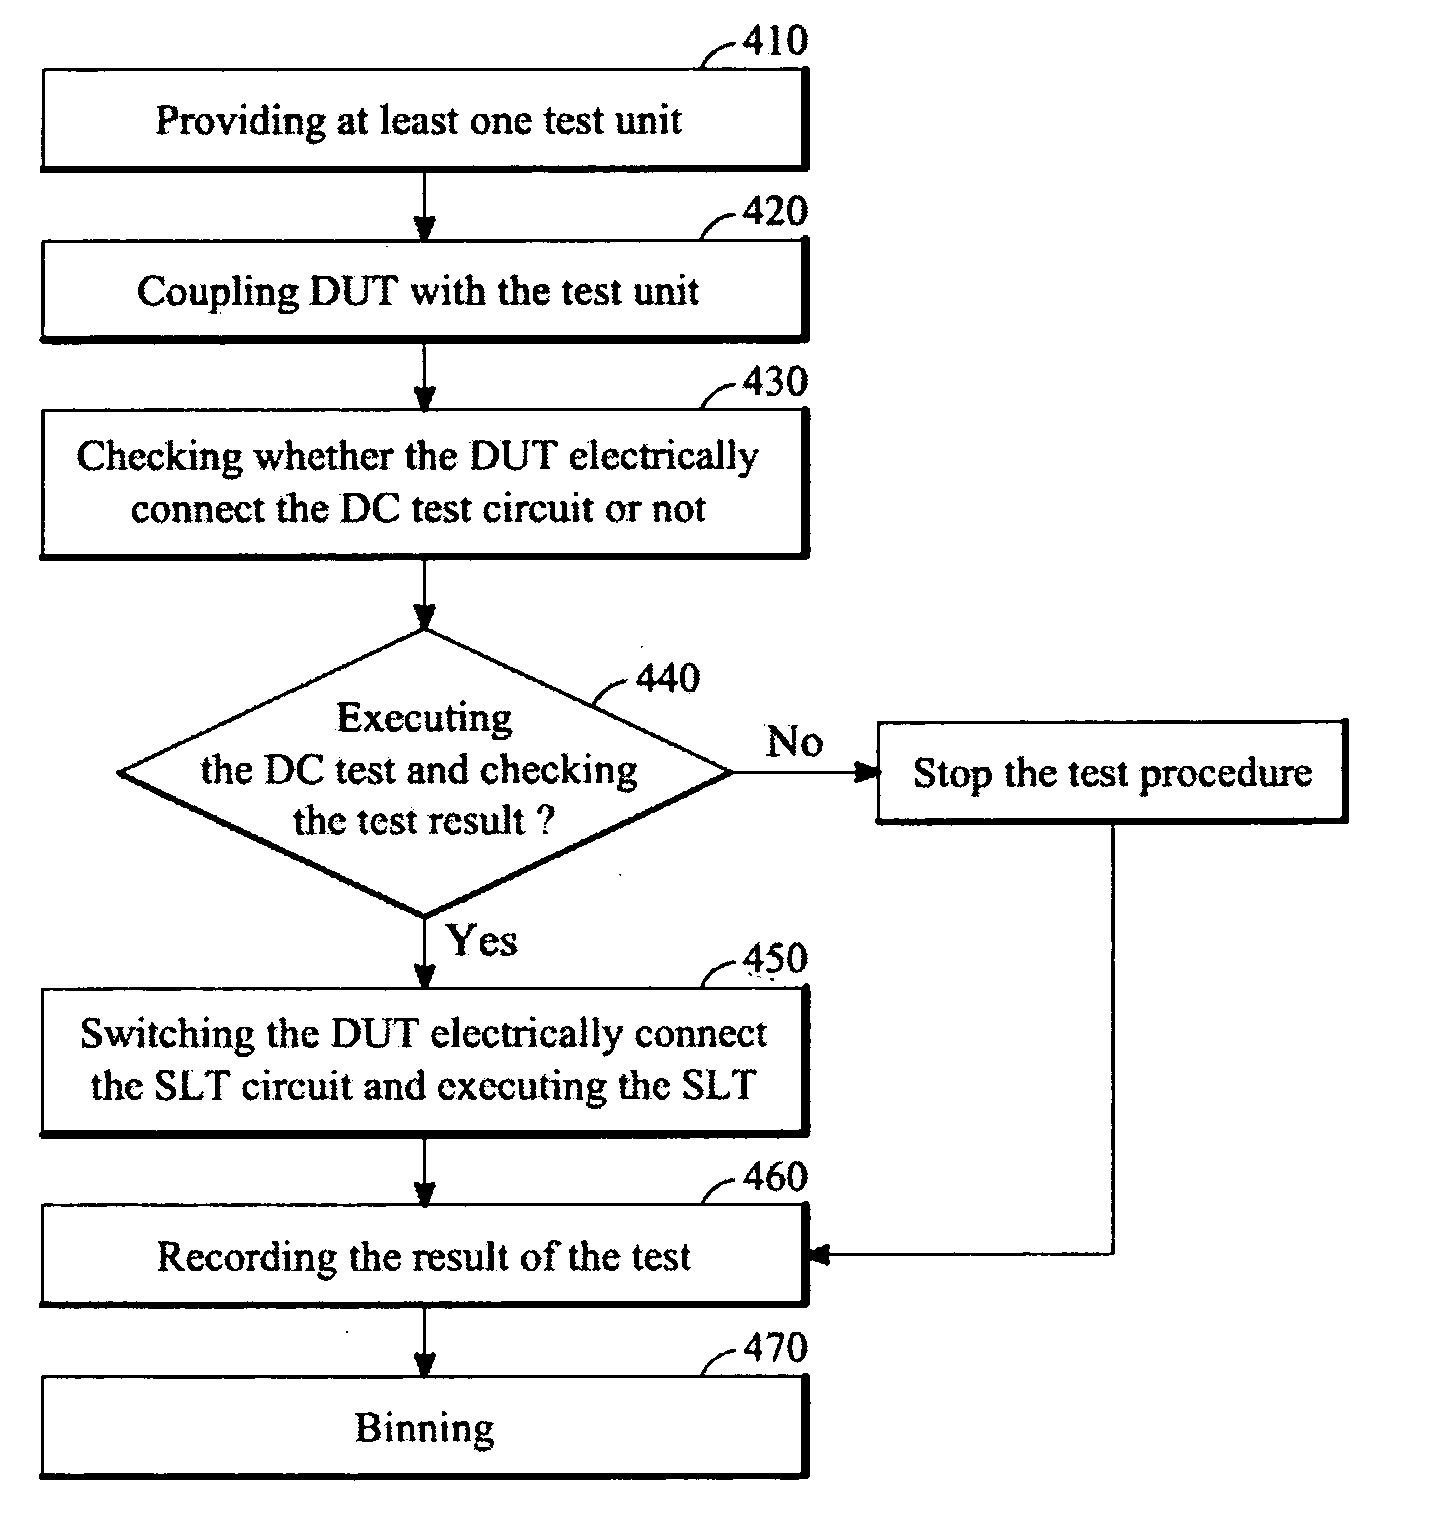 Structure of test area for a semiconductor tester